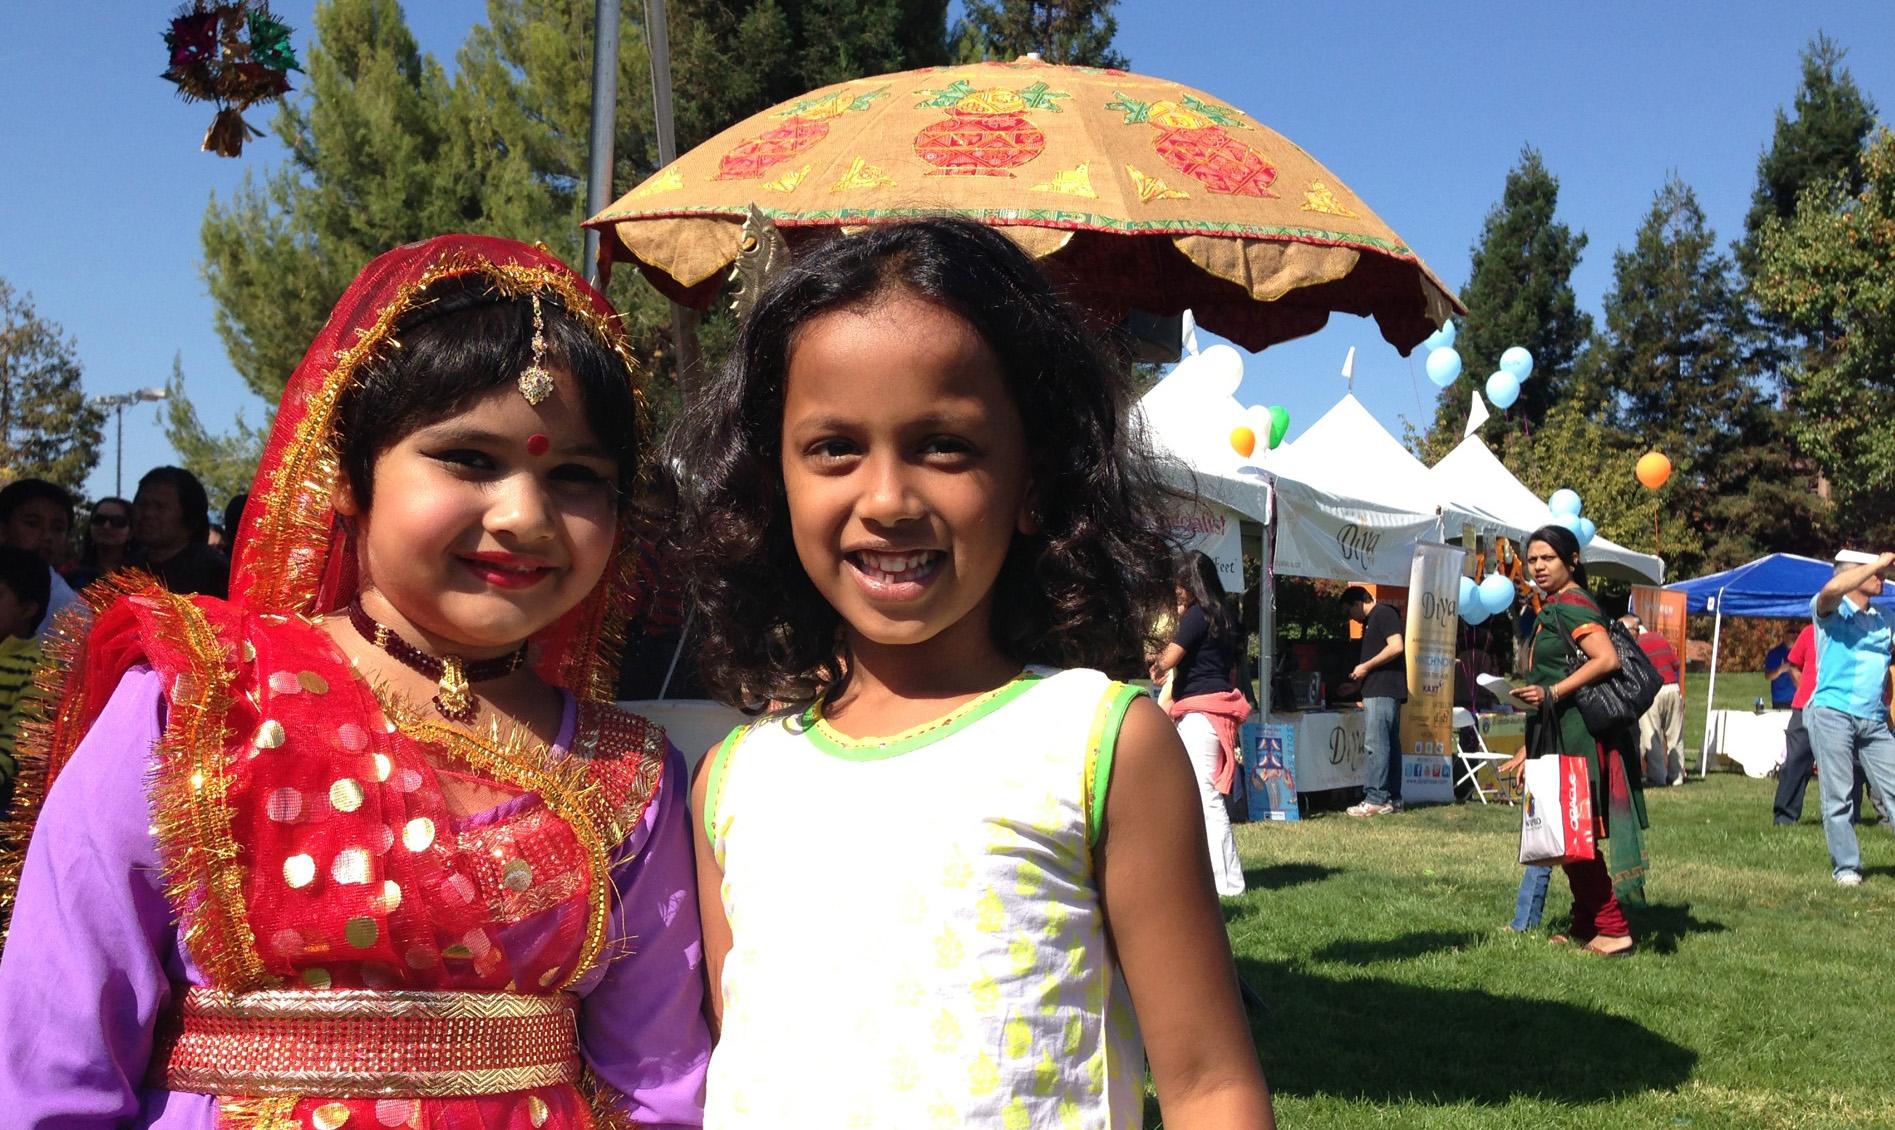 Dancers relax after performing during a Diwali Festival in Silicon Valley 